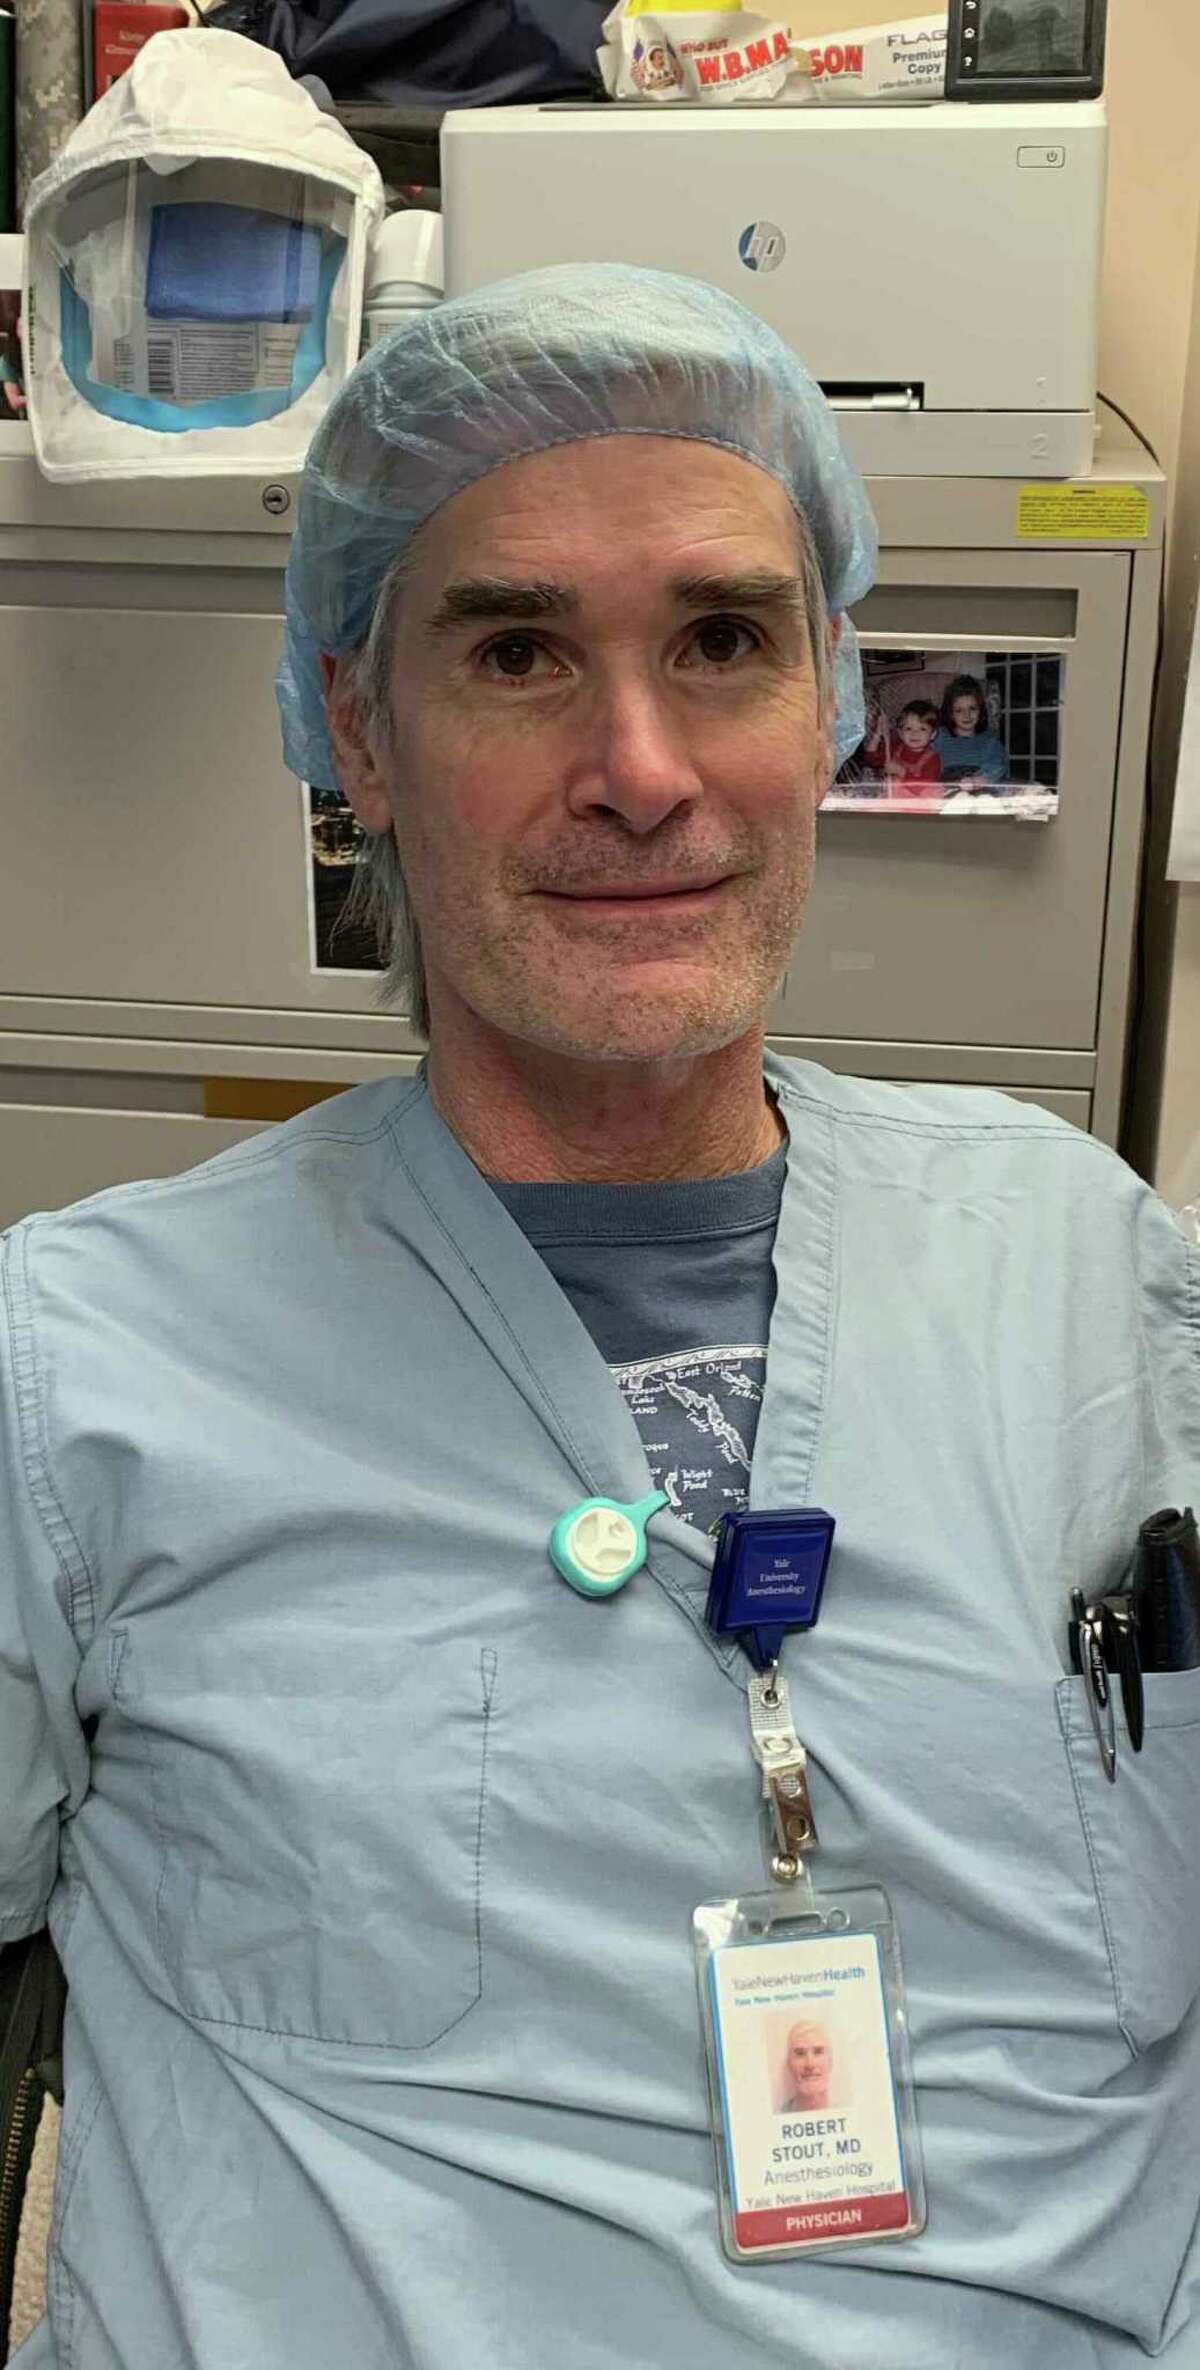 Dr. Bob Stout, a physician at Yale New Haven Hospital, wears a Fresh Air Clip designed by researchers at the Yale School of Public Health.